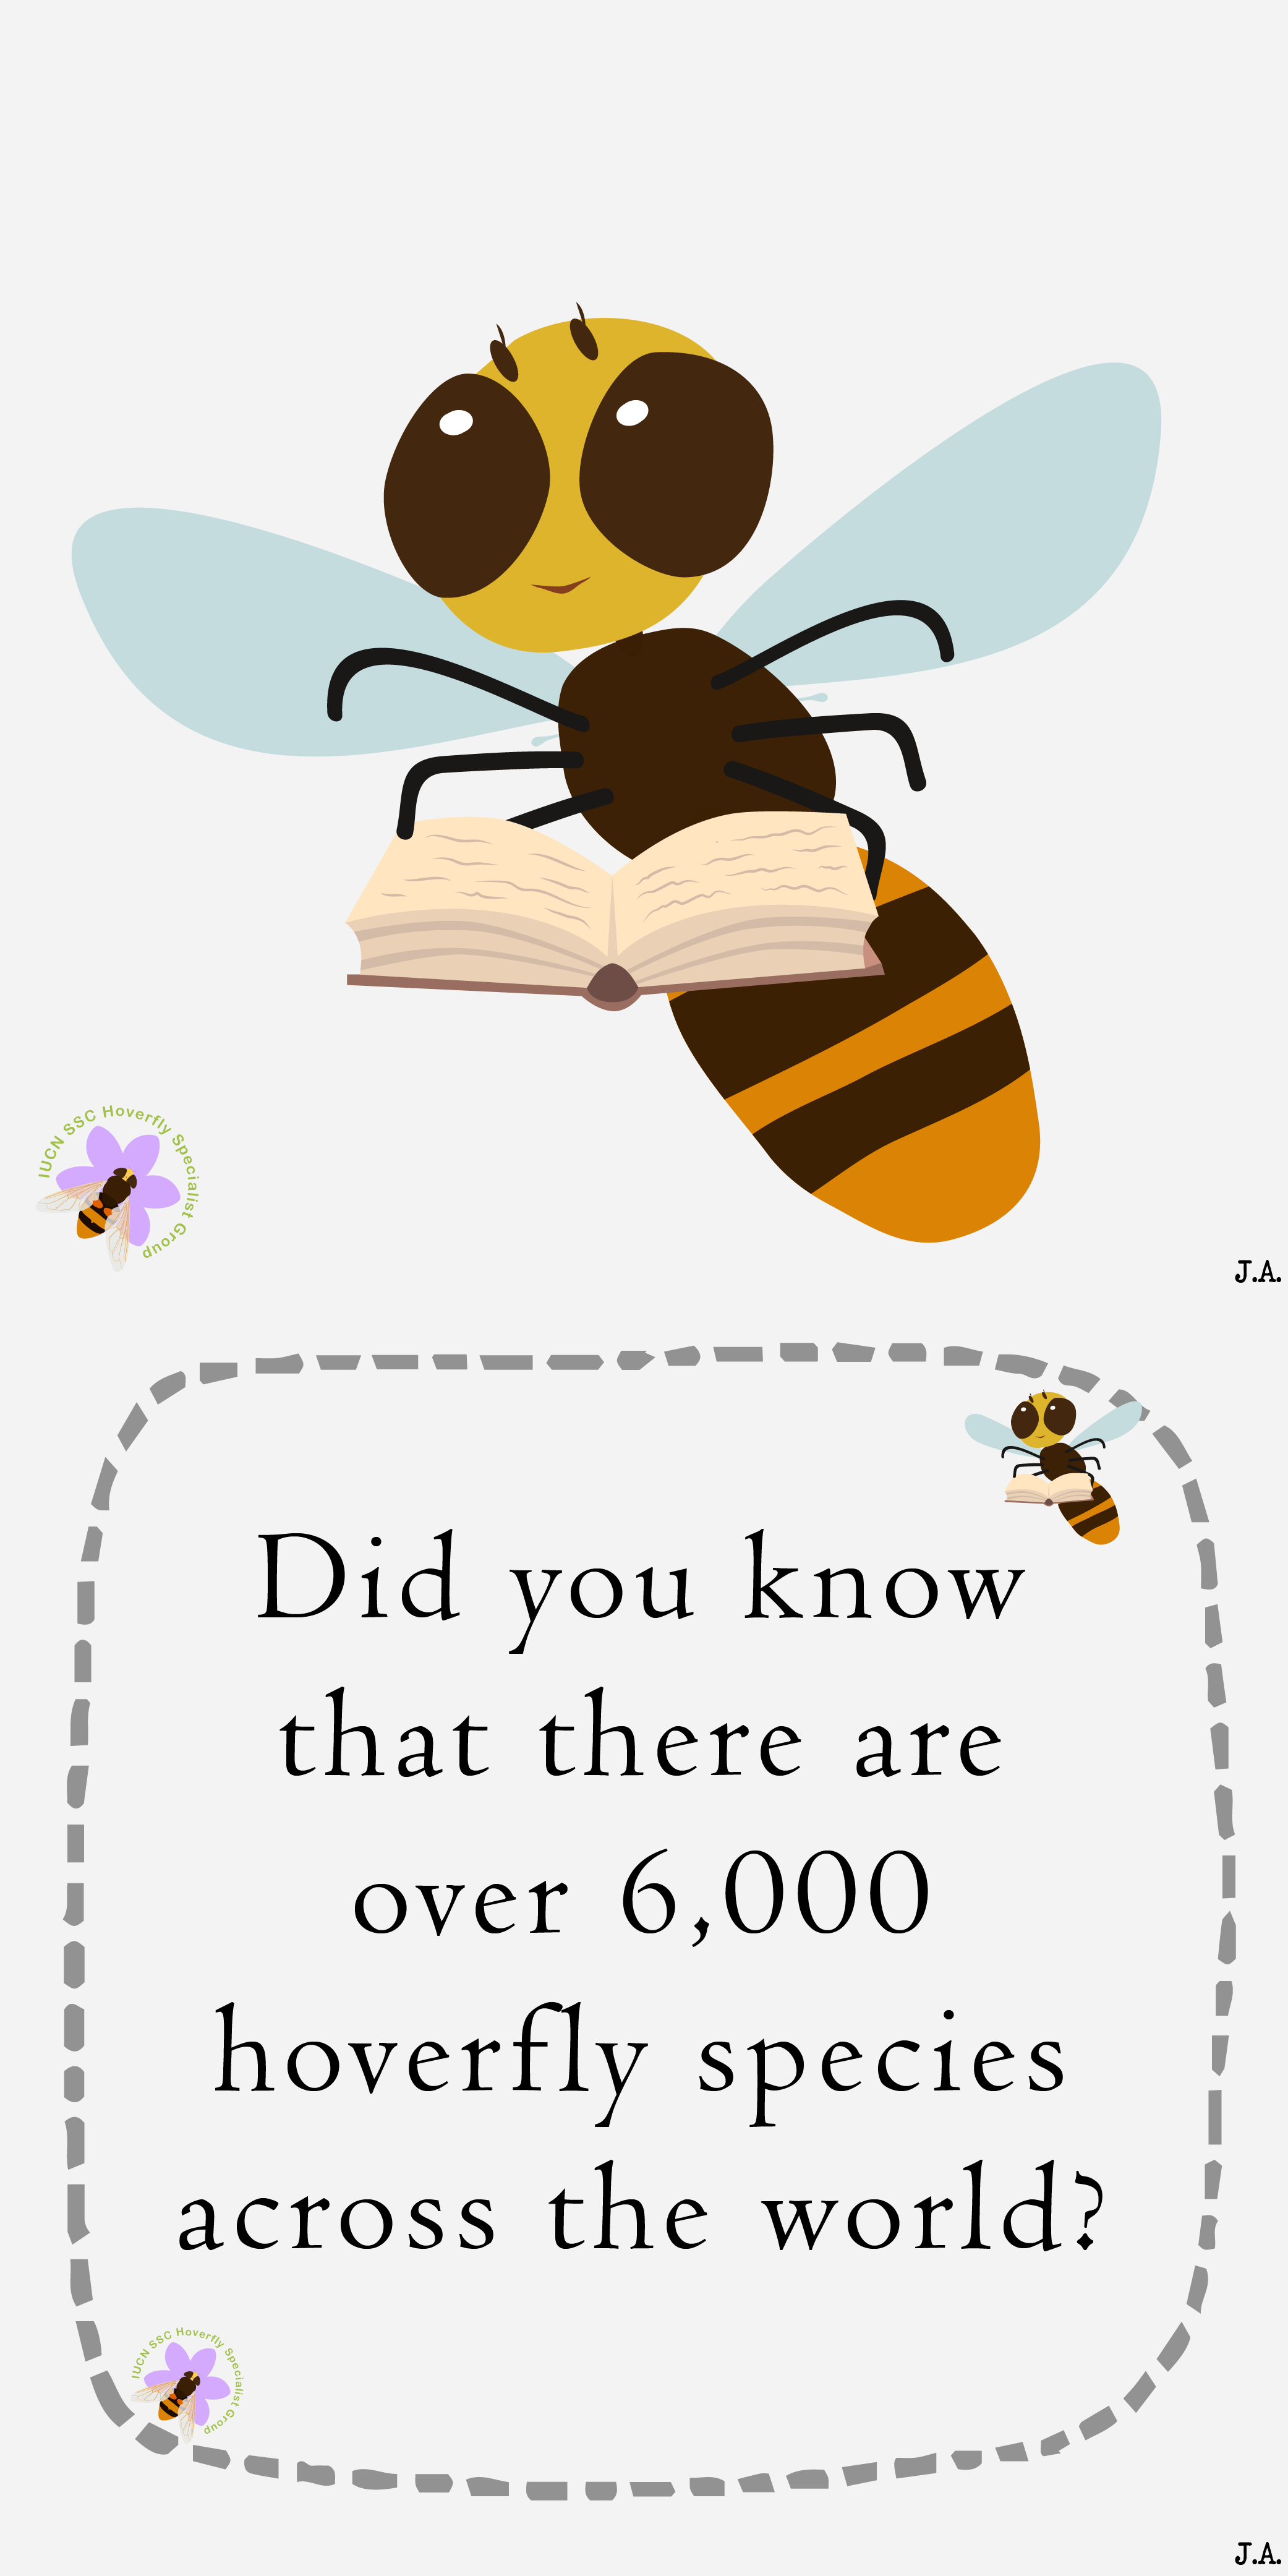 Hoverfly Fact 1